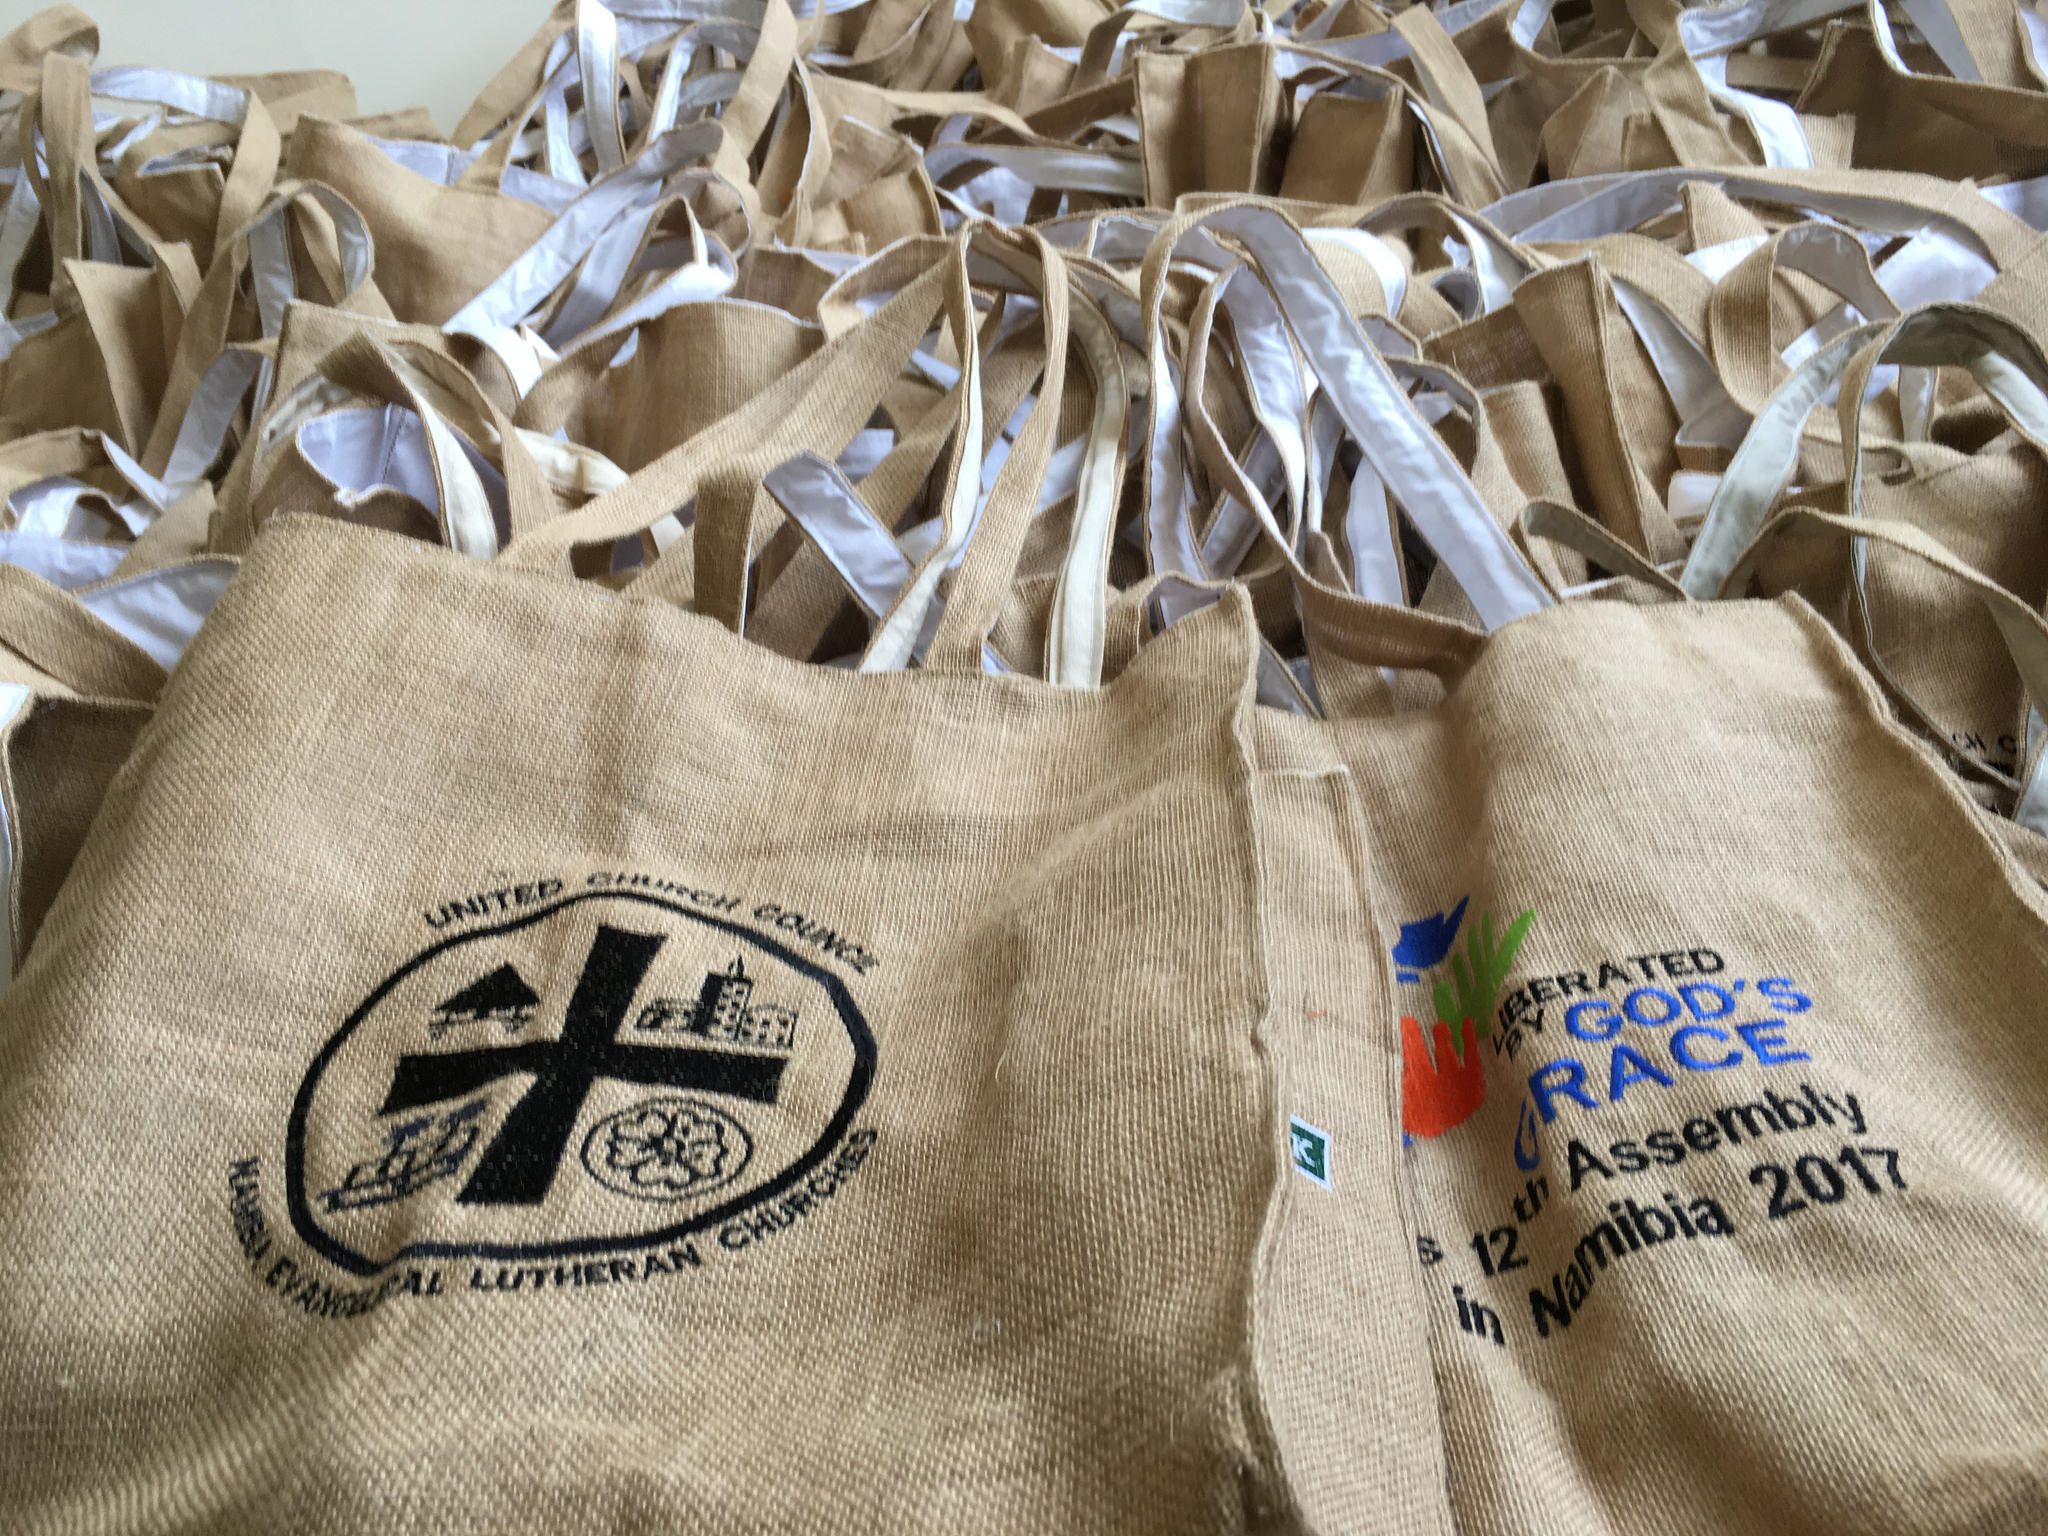 Conference bags for the LWF Twelfth Assembly delegates and guests, produced by Otavi Women in Textile, Namibia. Photo: LWF/Albin Hillert